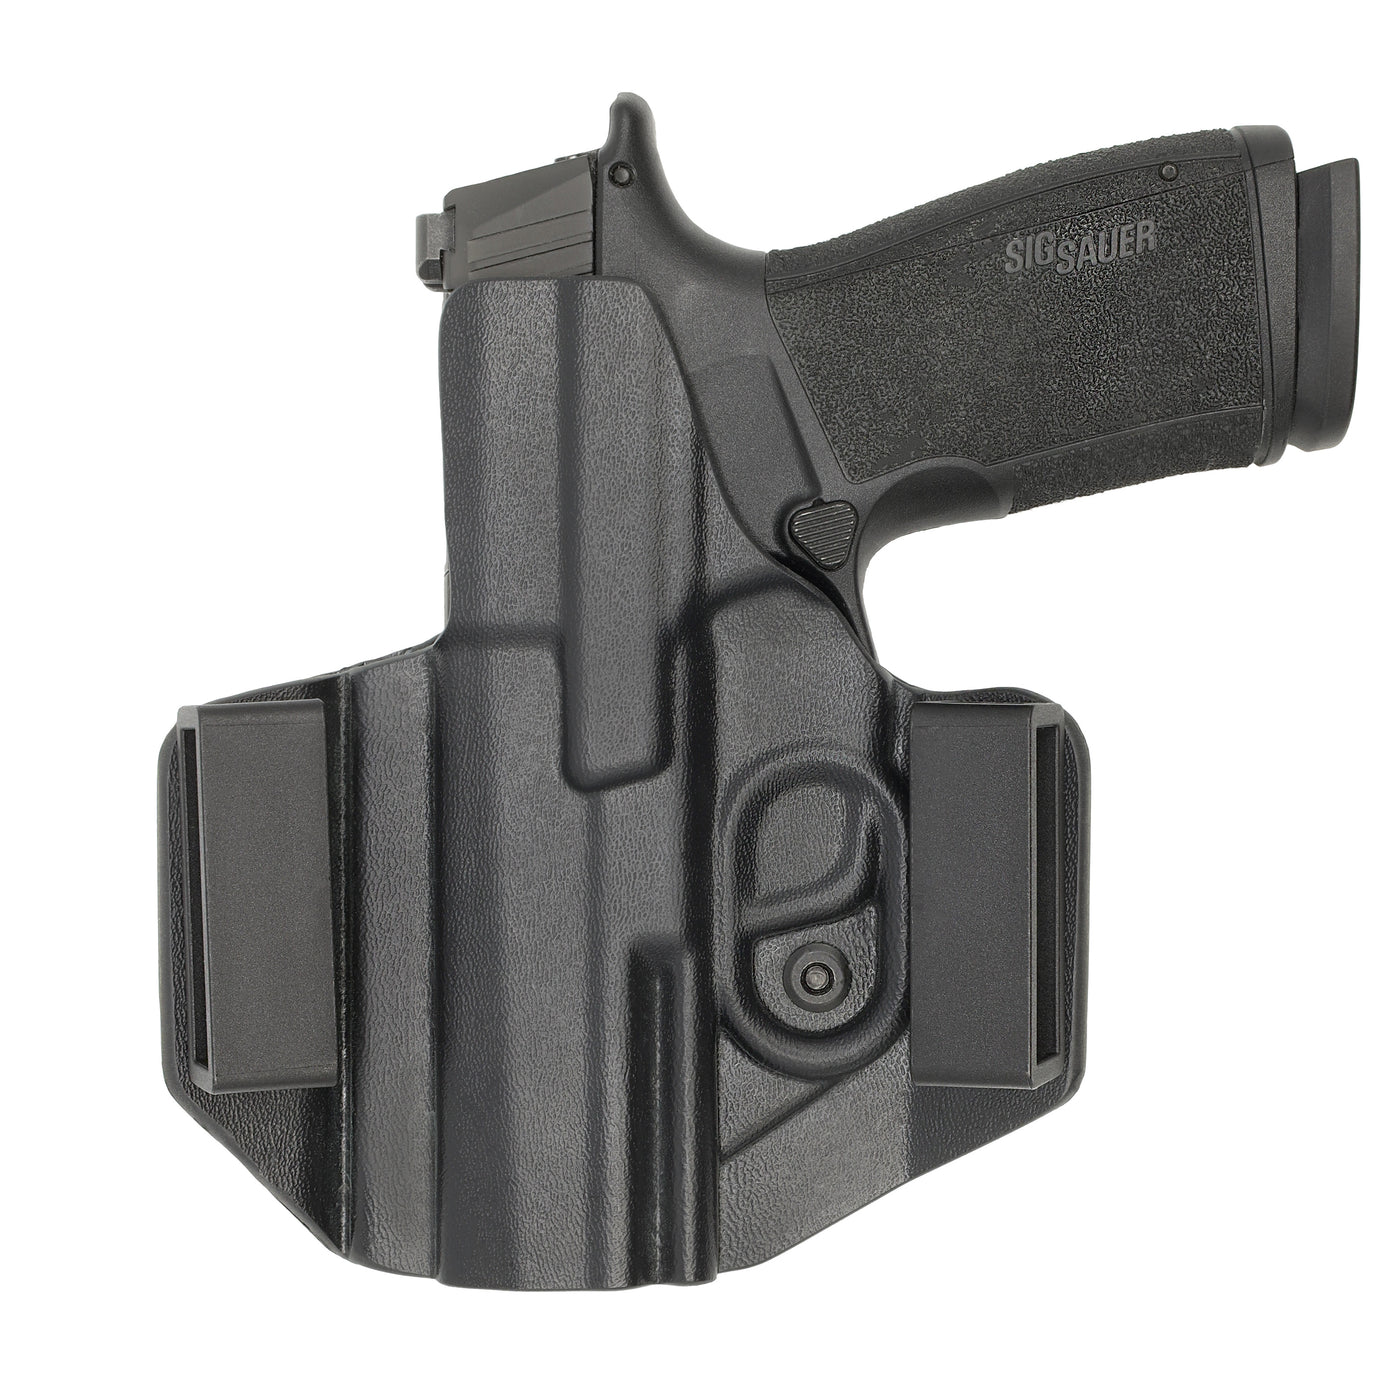 C&G Holsters custom OWB Covert SIG P365 XMacro in holstered position back view